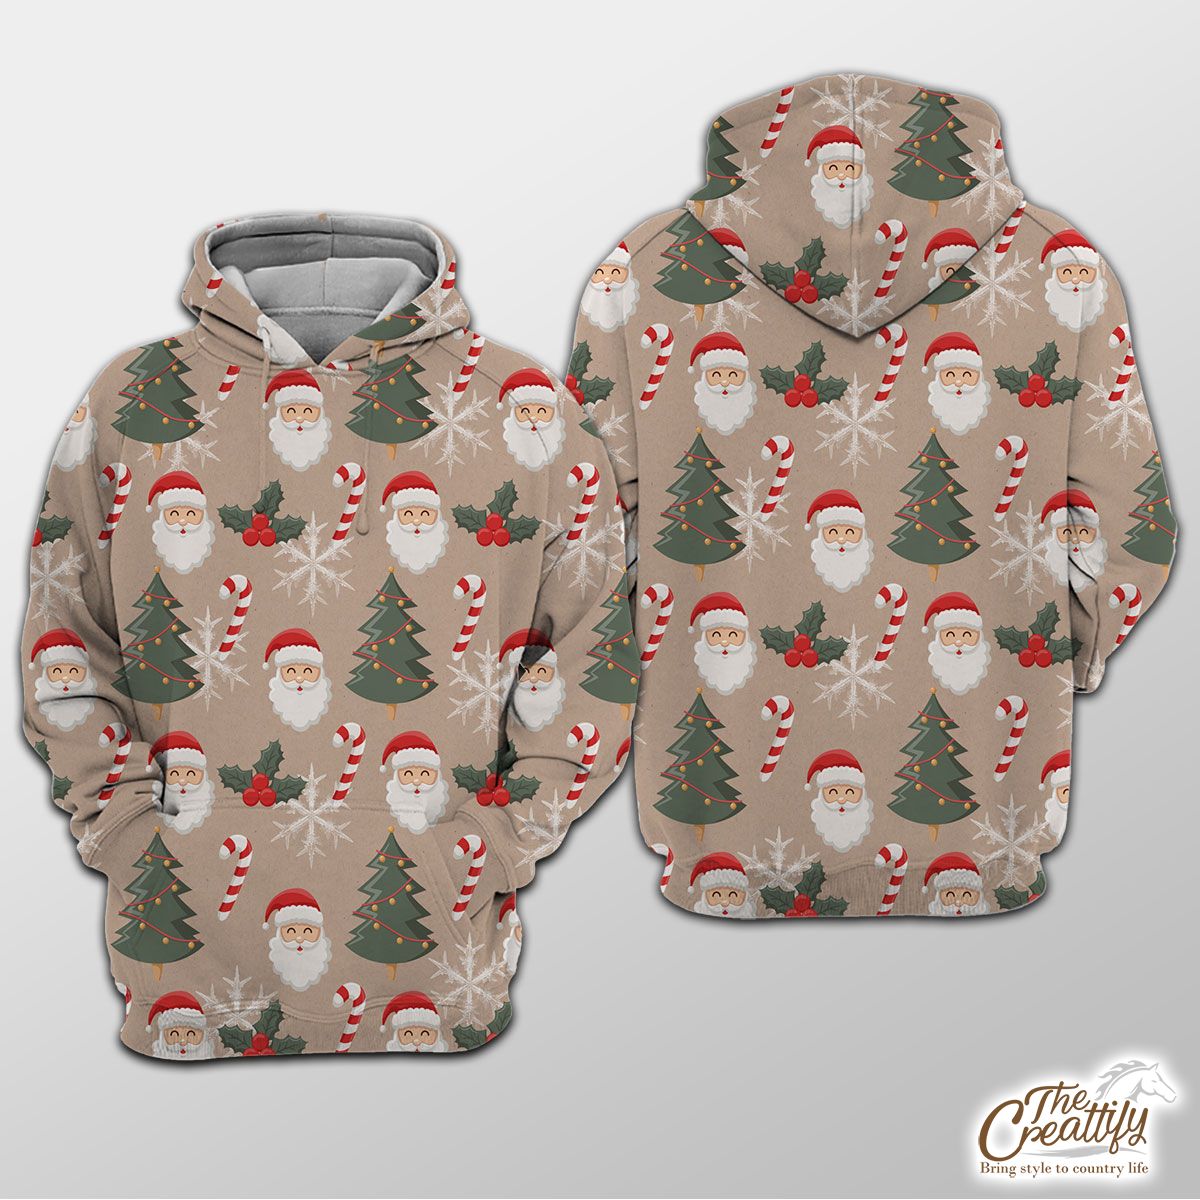 Santa Clause, Christmas Tree, Candy Cane, Holly Leaf On Snowflake Background Hoodie